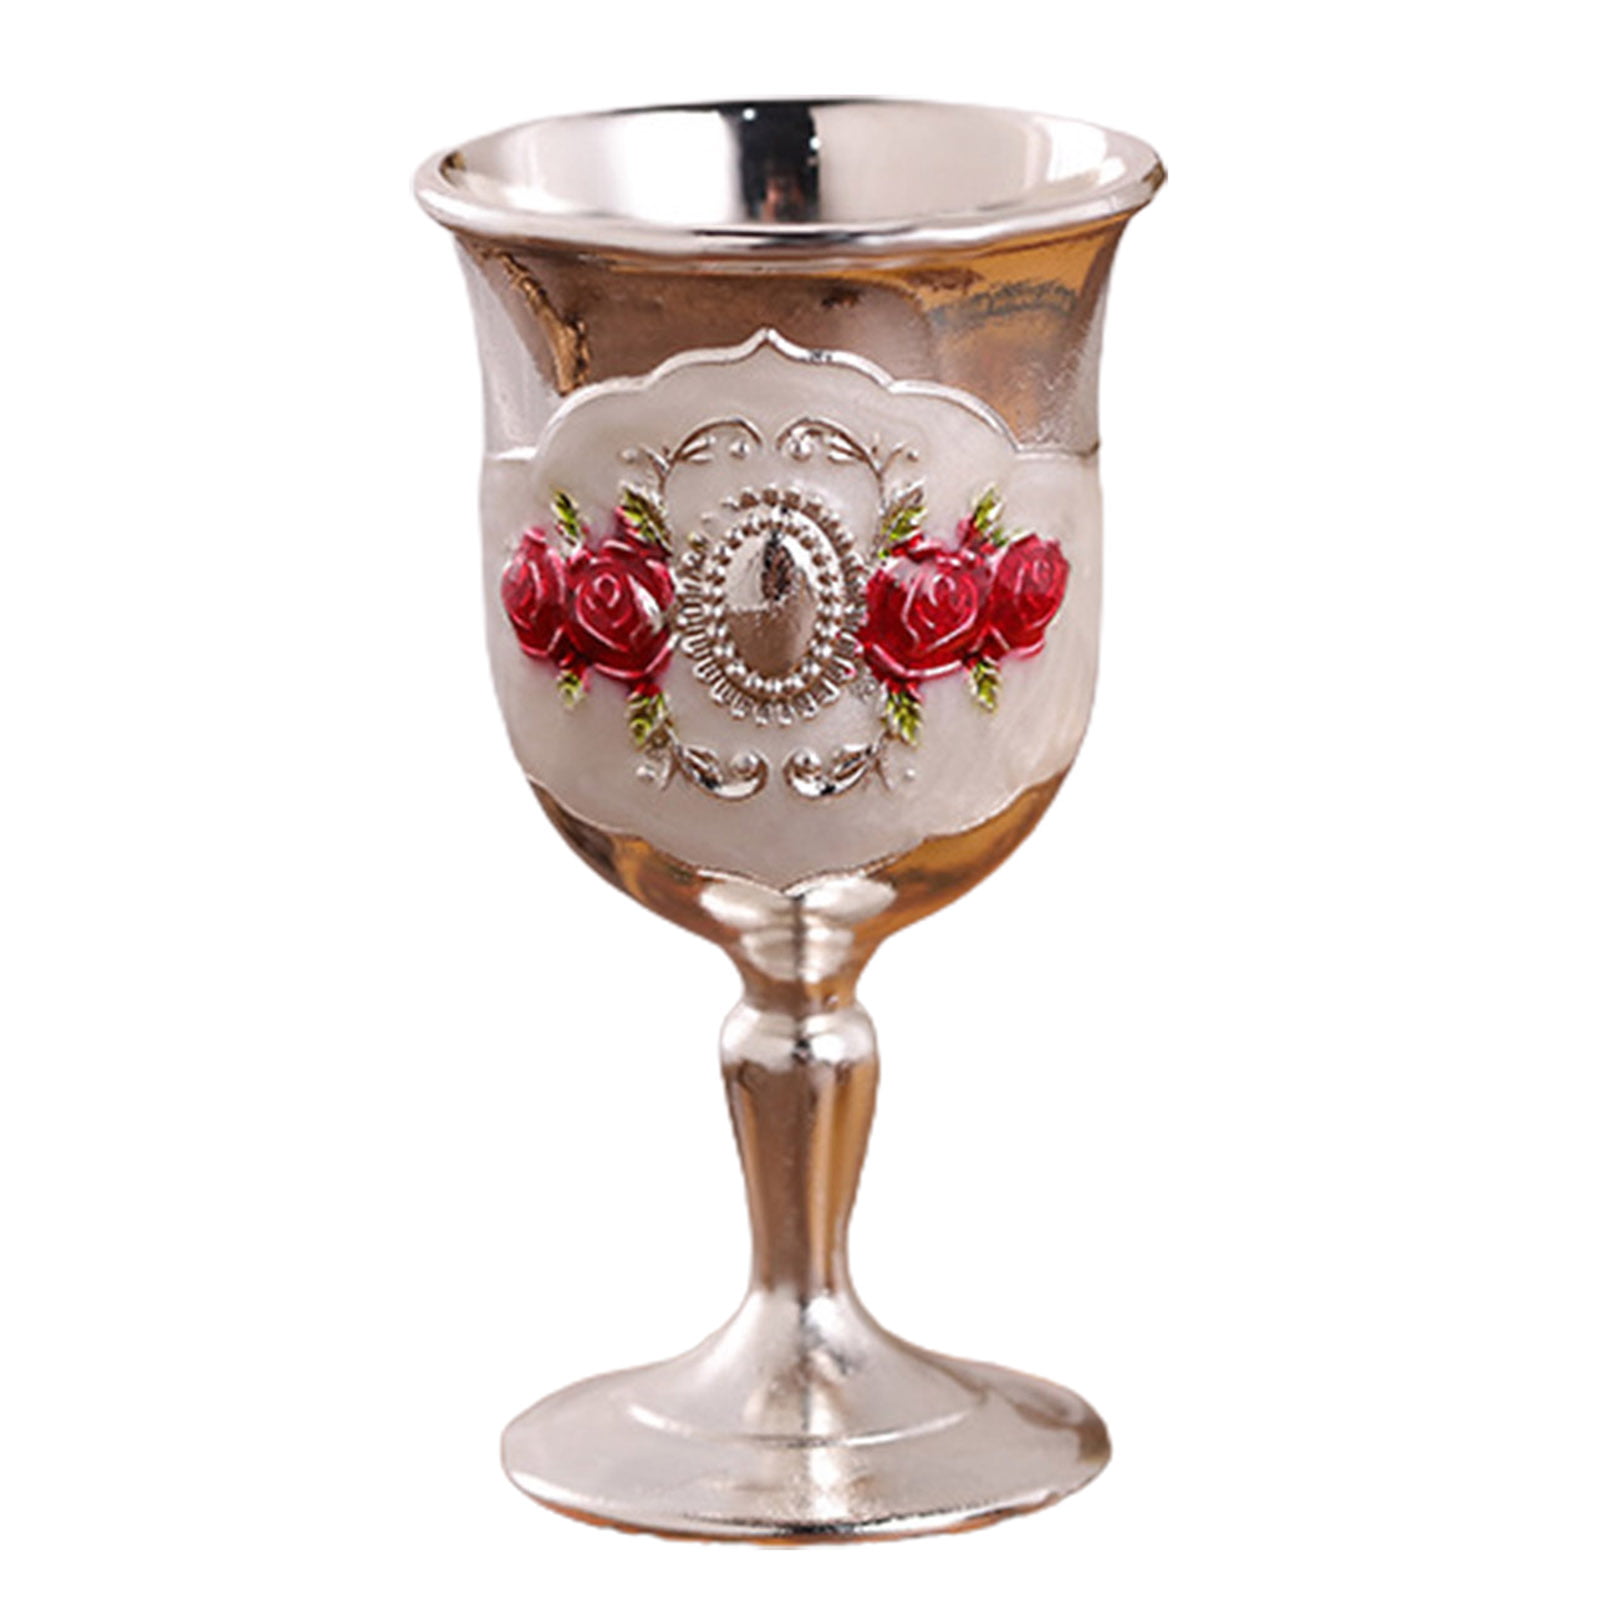 Copper Wine Glasses, European Vintage Wine Cup Metal Wine Goblet Art Craft Decoration Wine Glass Portable Wine Tumbler for Coffee, Beer, Whiskey